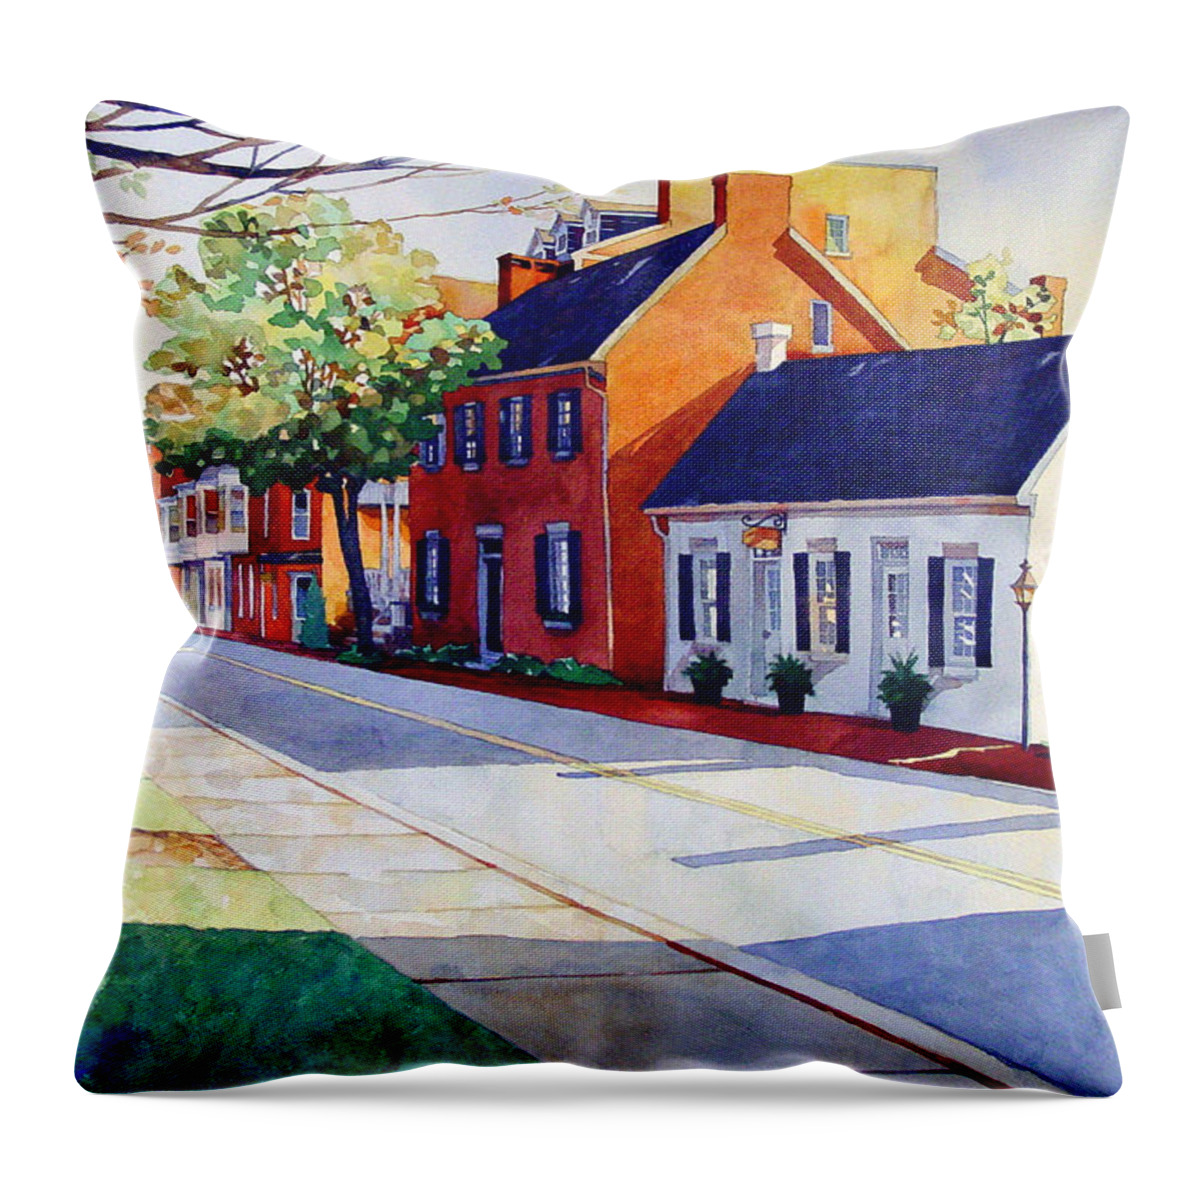 Early Morning Throw Pillow featuring the painting The Historic District by Mick Williams